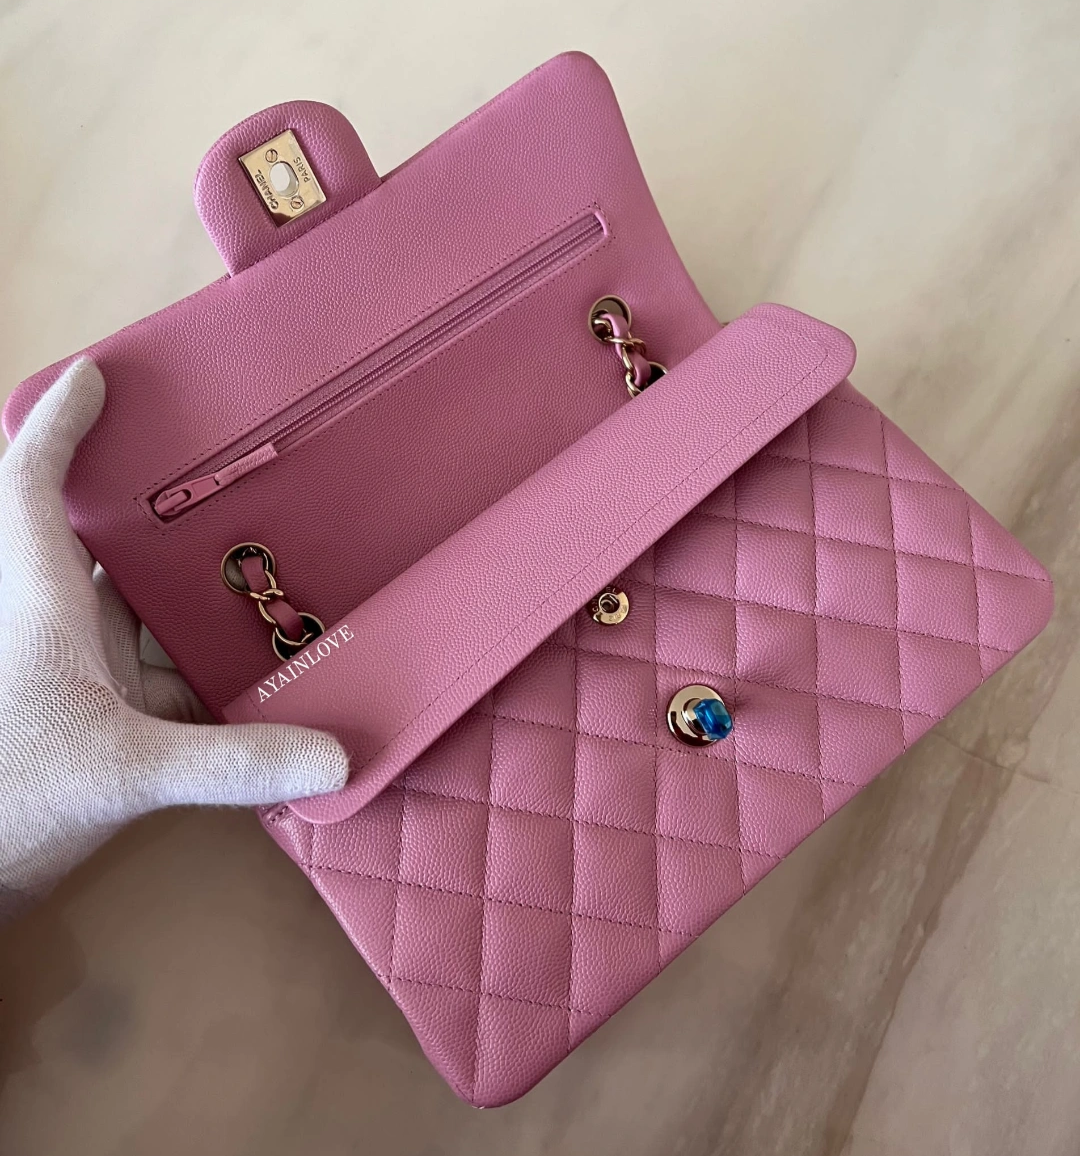 classic chanel flap bag small pink